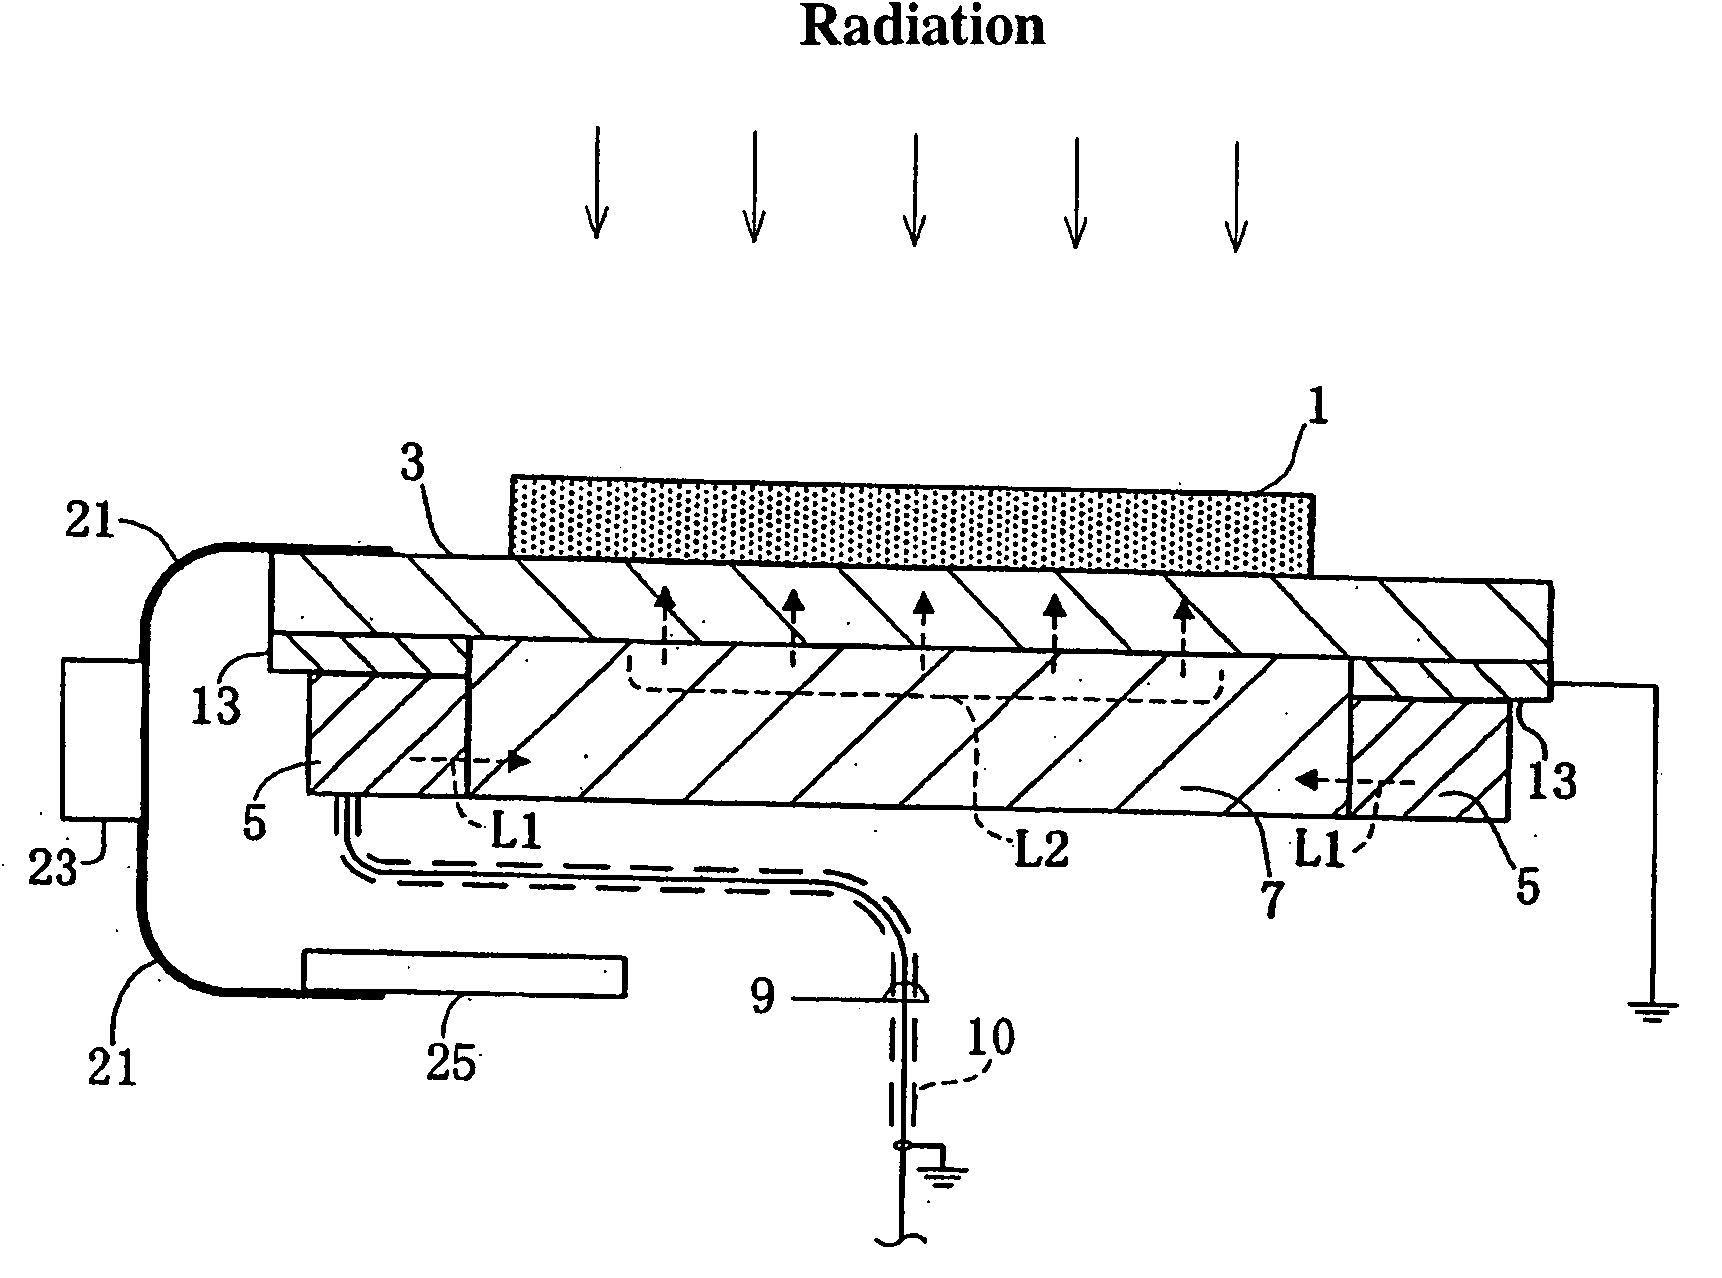 Two-dimensional radiation detector